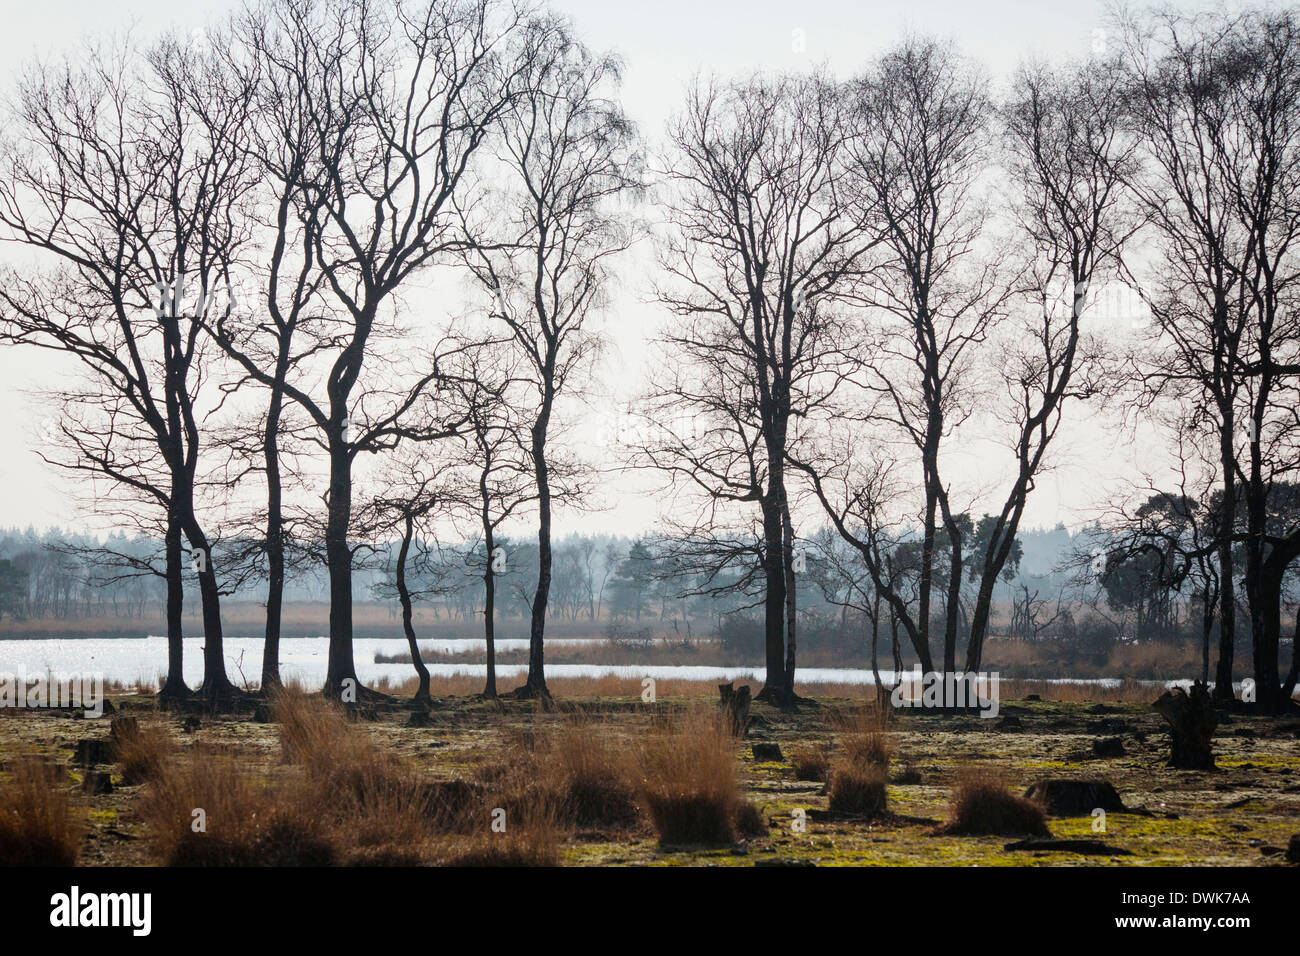 Landscape at the Strabrechtse Heide (moor and heath) with a fen in the background, in the Netherlands during spring Stock Photo